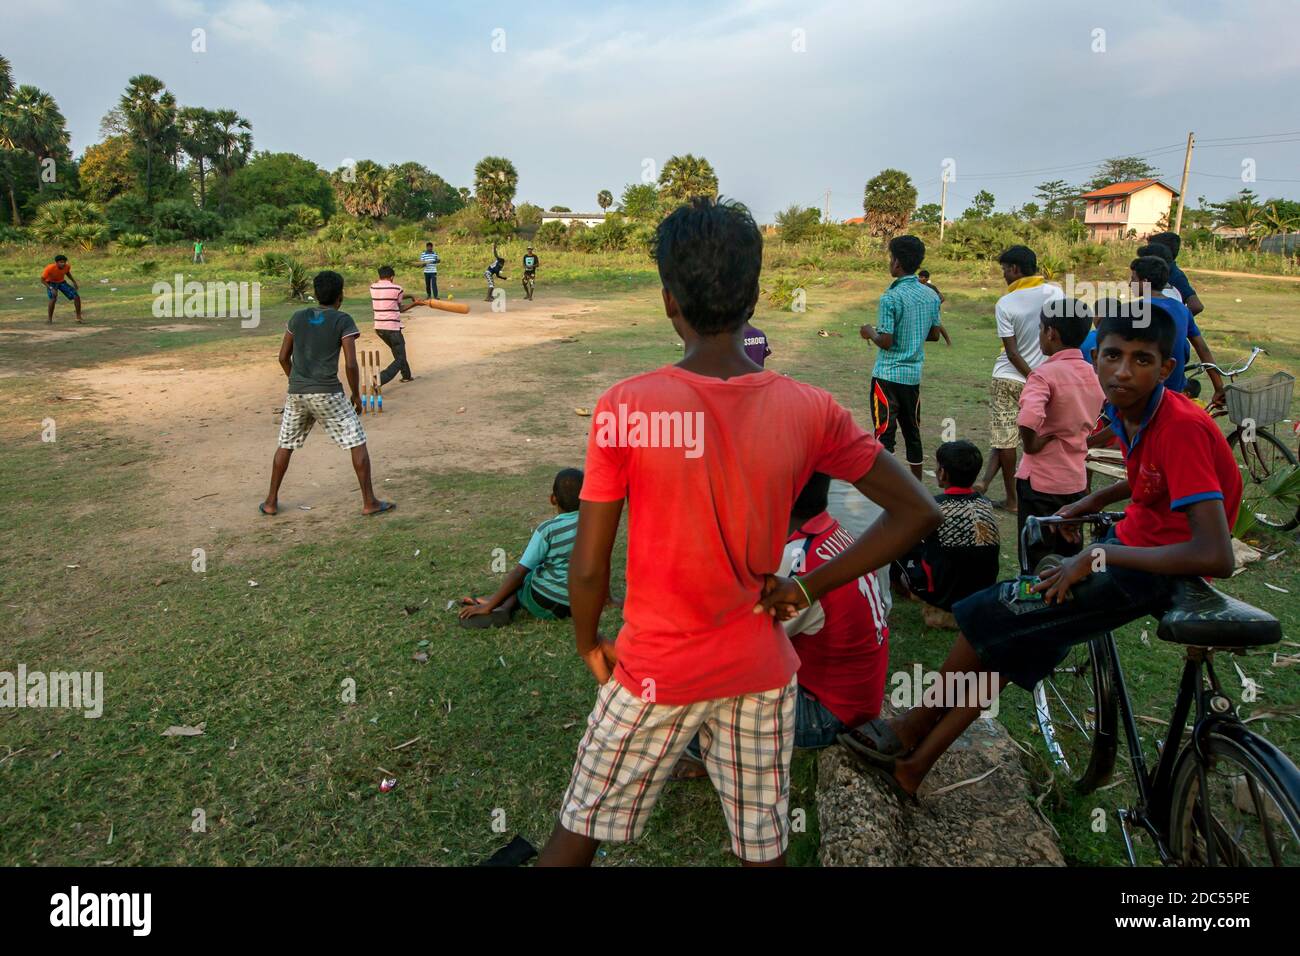 Spectators watch a cricket game being played on a dirt pitch on a Sunday afternoon in Uppuveli on the east coast of Sri Lanka. Stock Photo